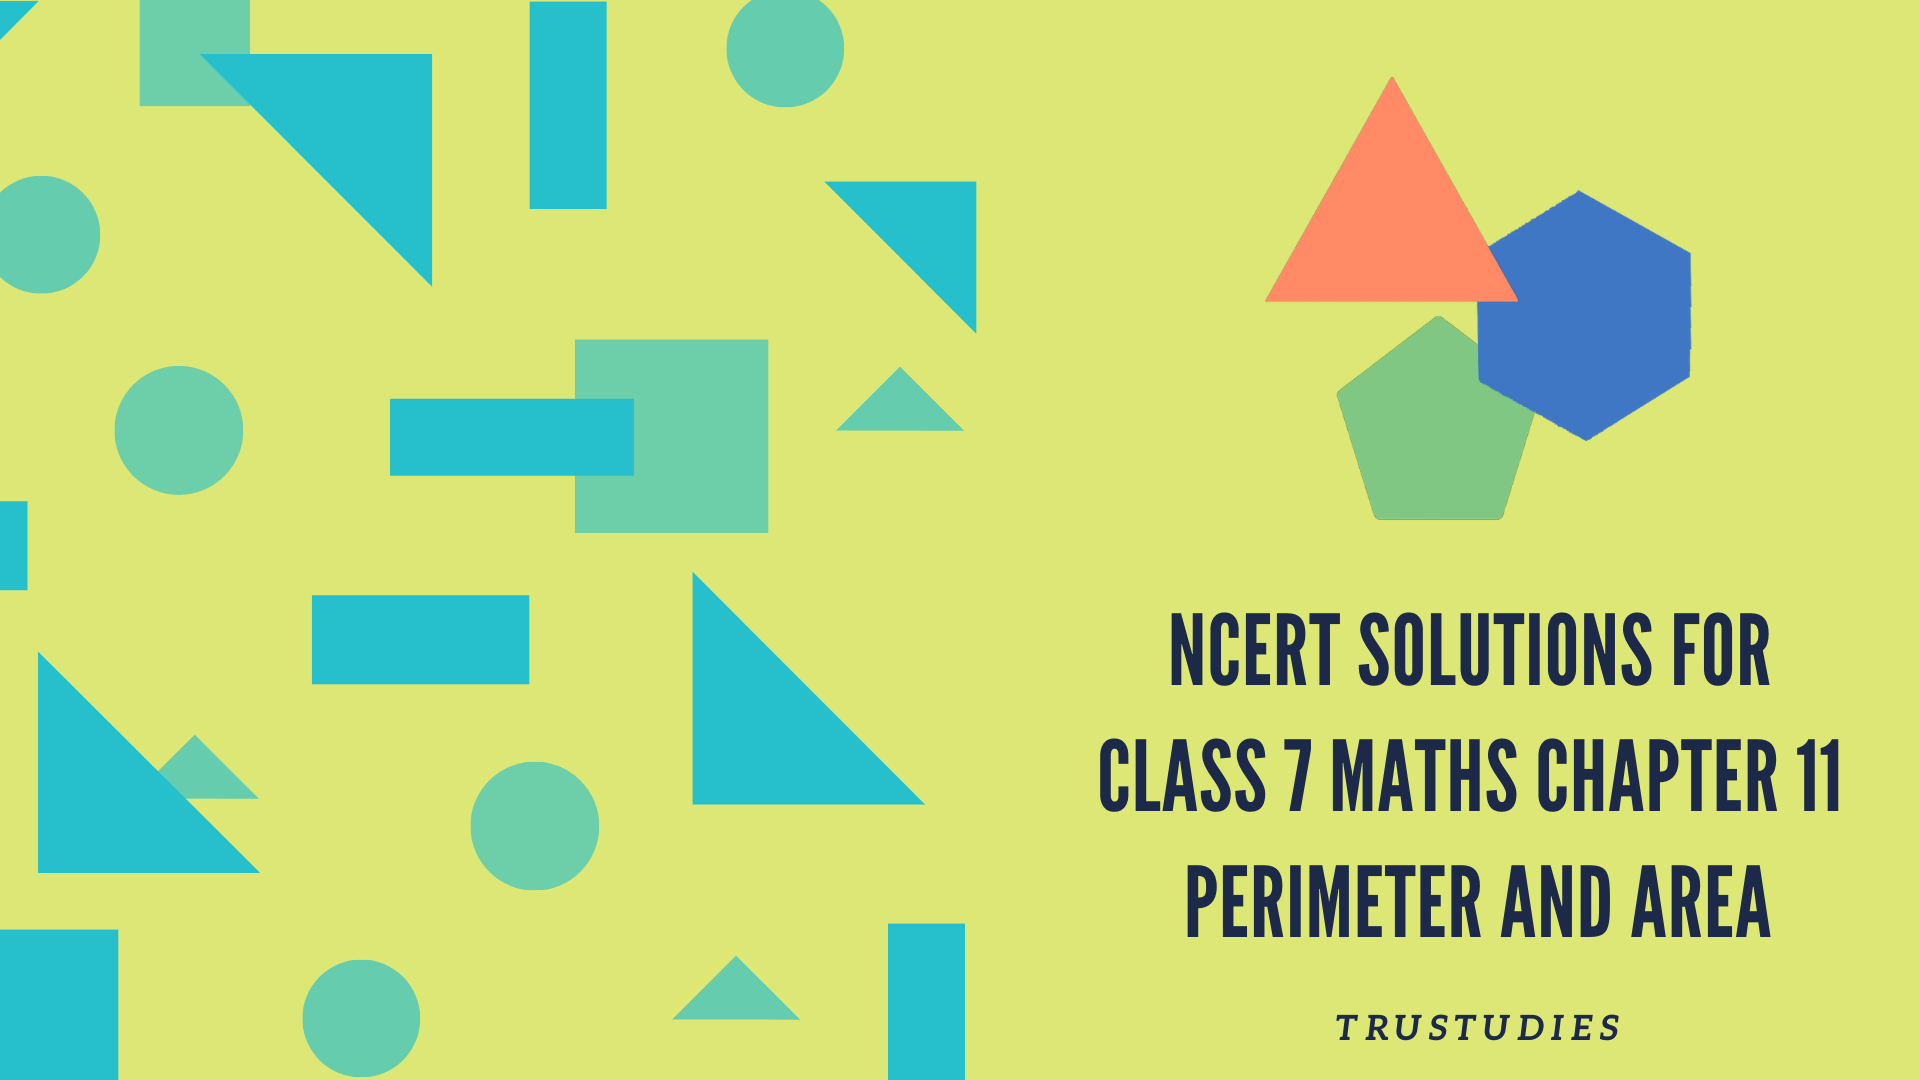 NCERT solutions for class 7 maths chapter 11 perimeter and area banner image